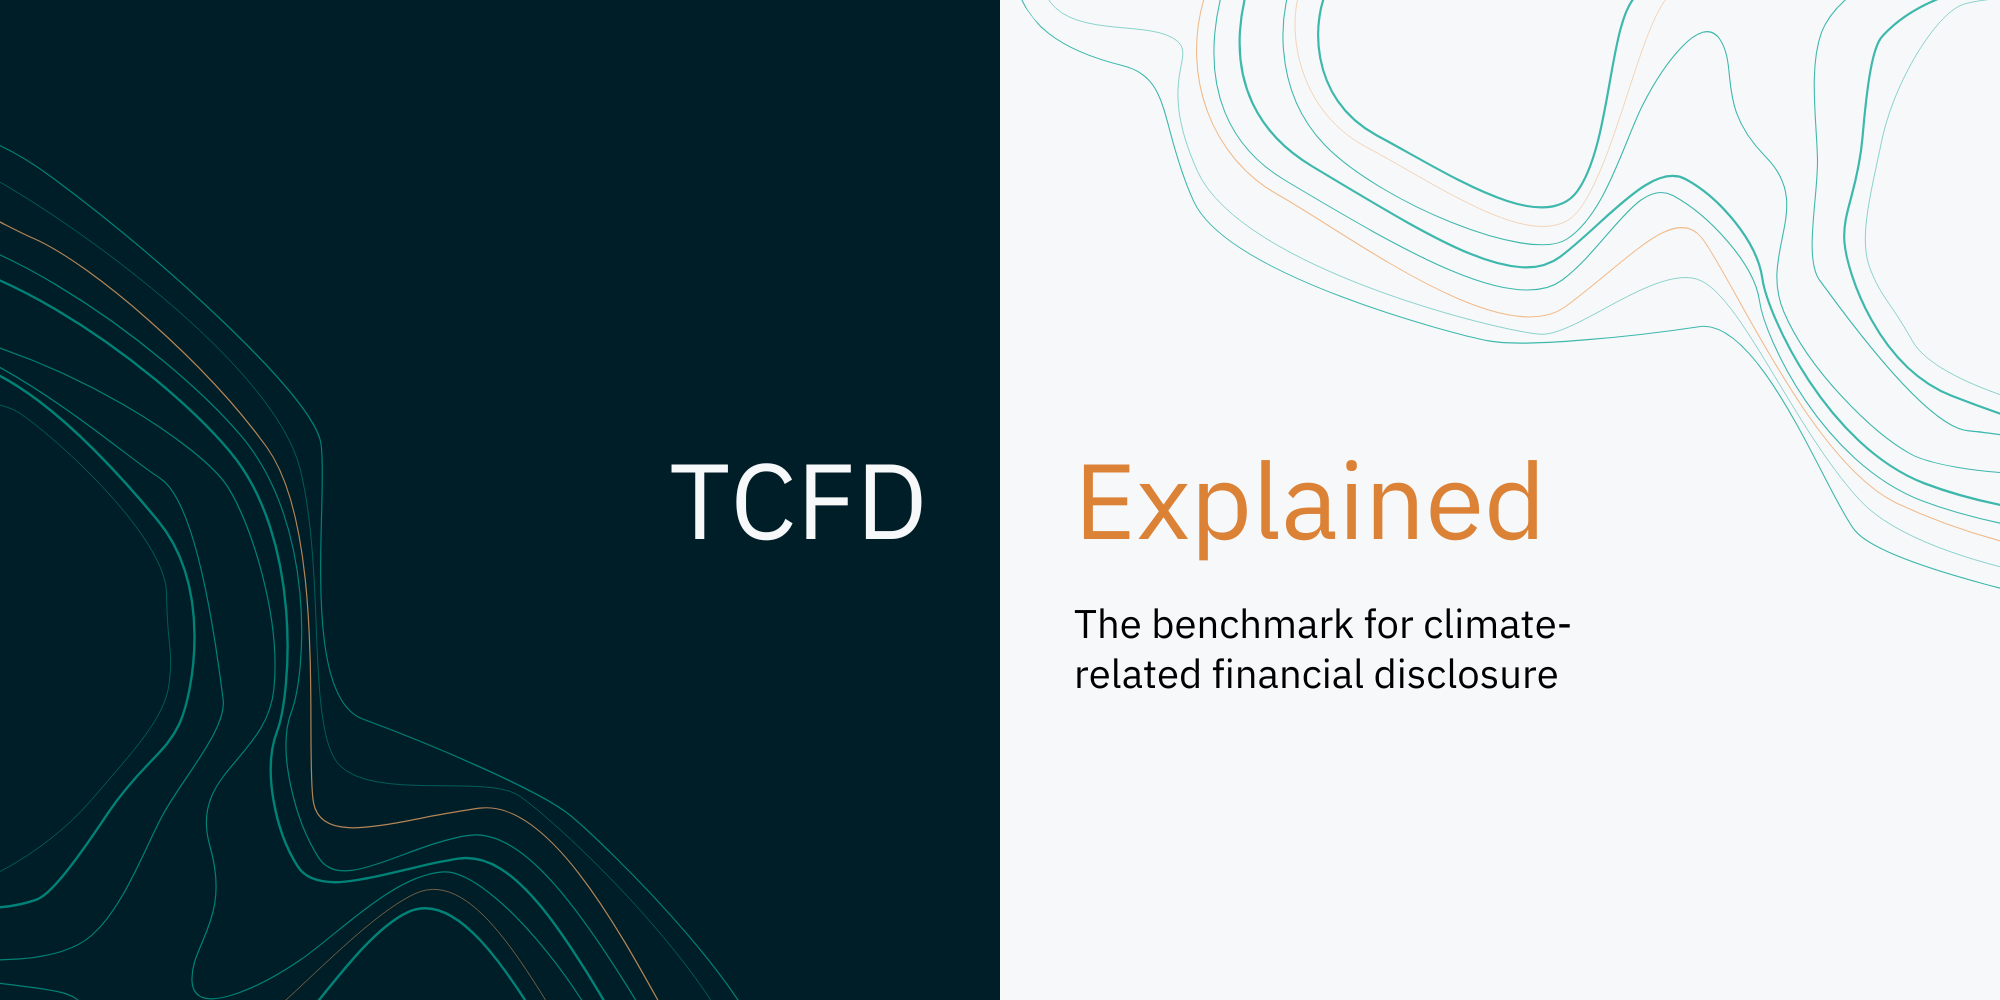 TCFD Explained: The benchmark for climate-related financial disclosure